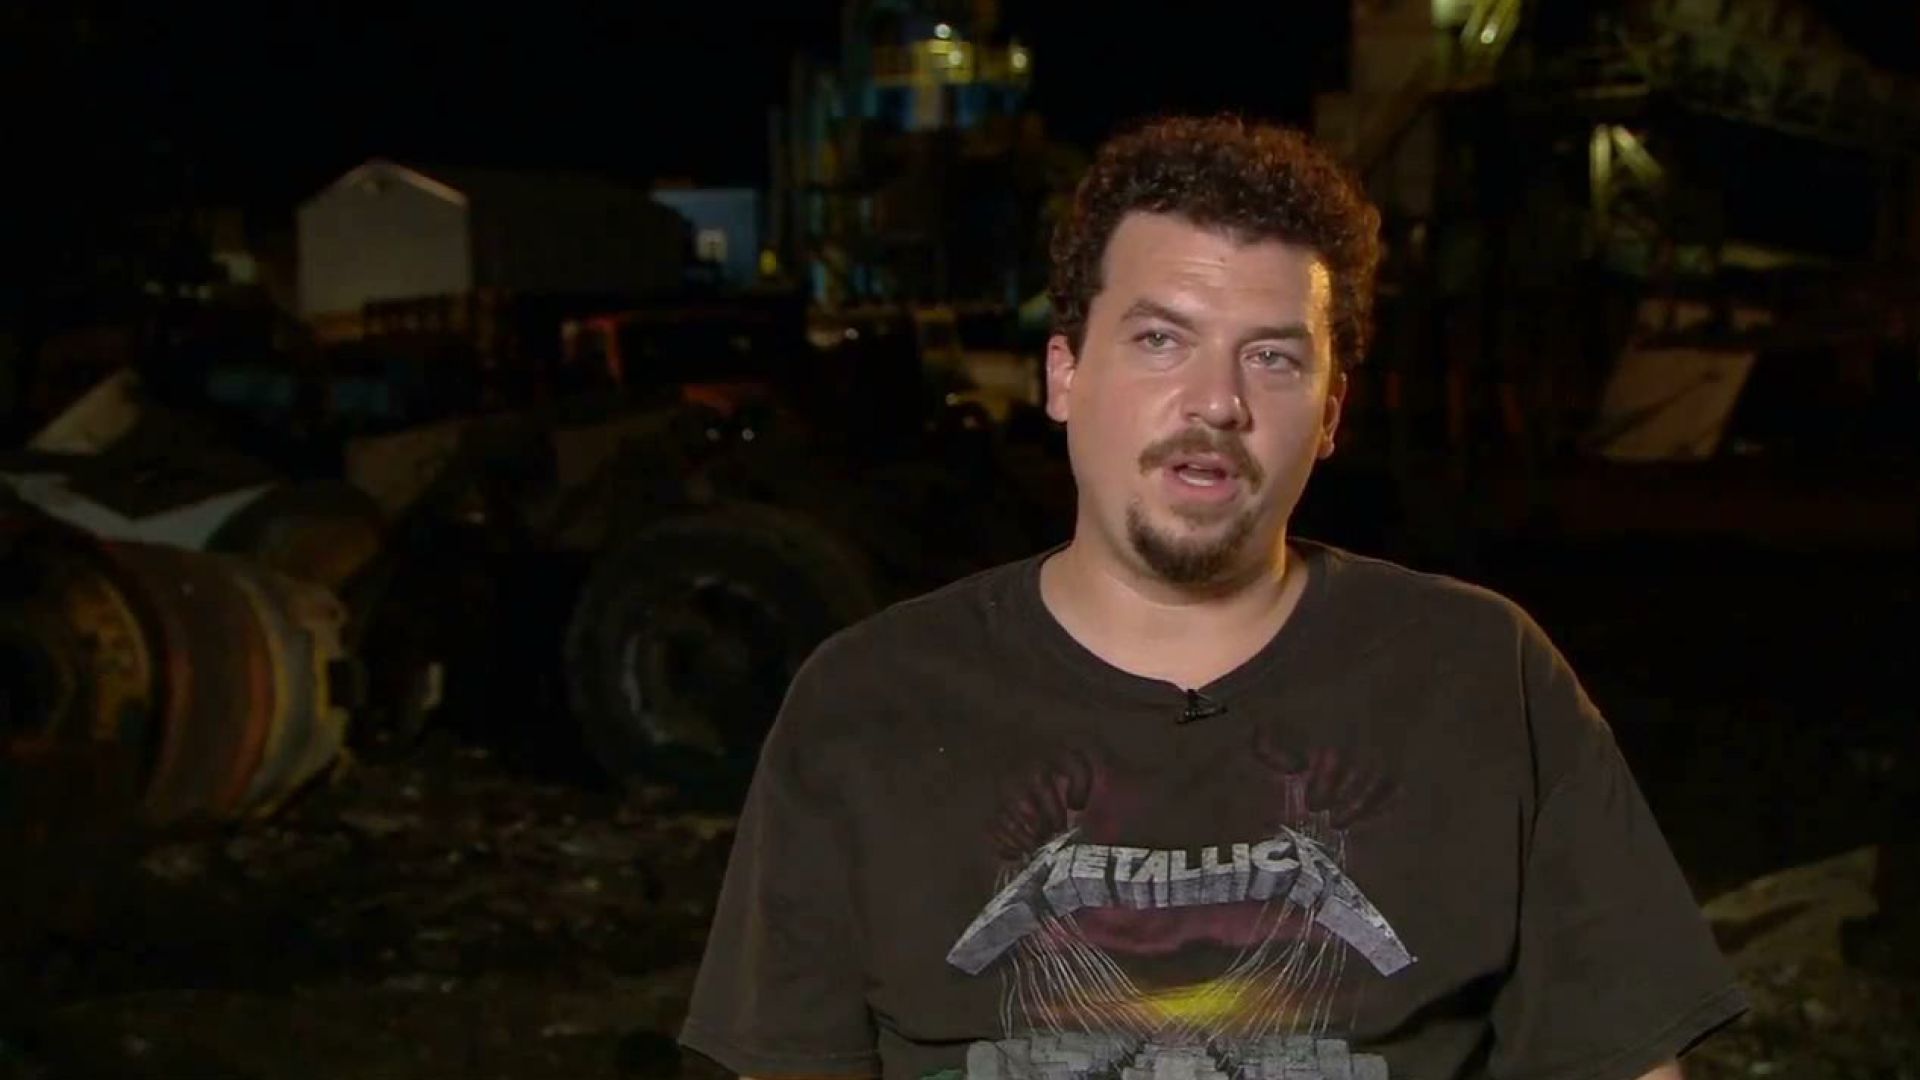 Danny McBride on his favorite films, robbing a bank and the stunts in 30 Minutes or Less